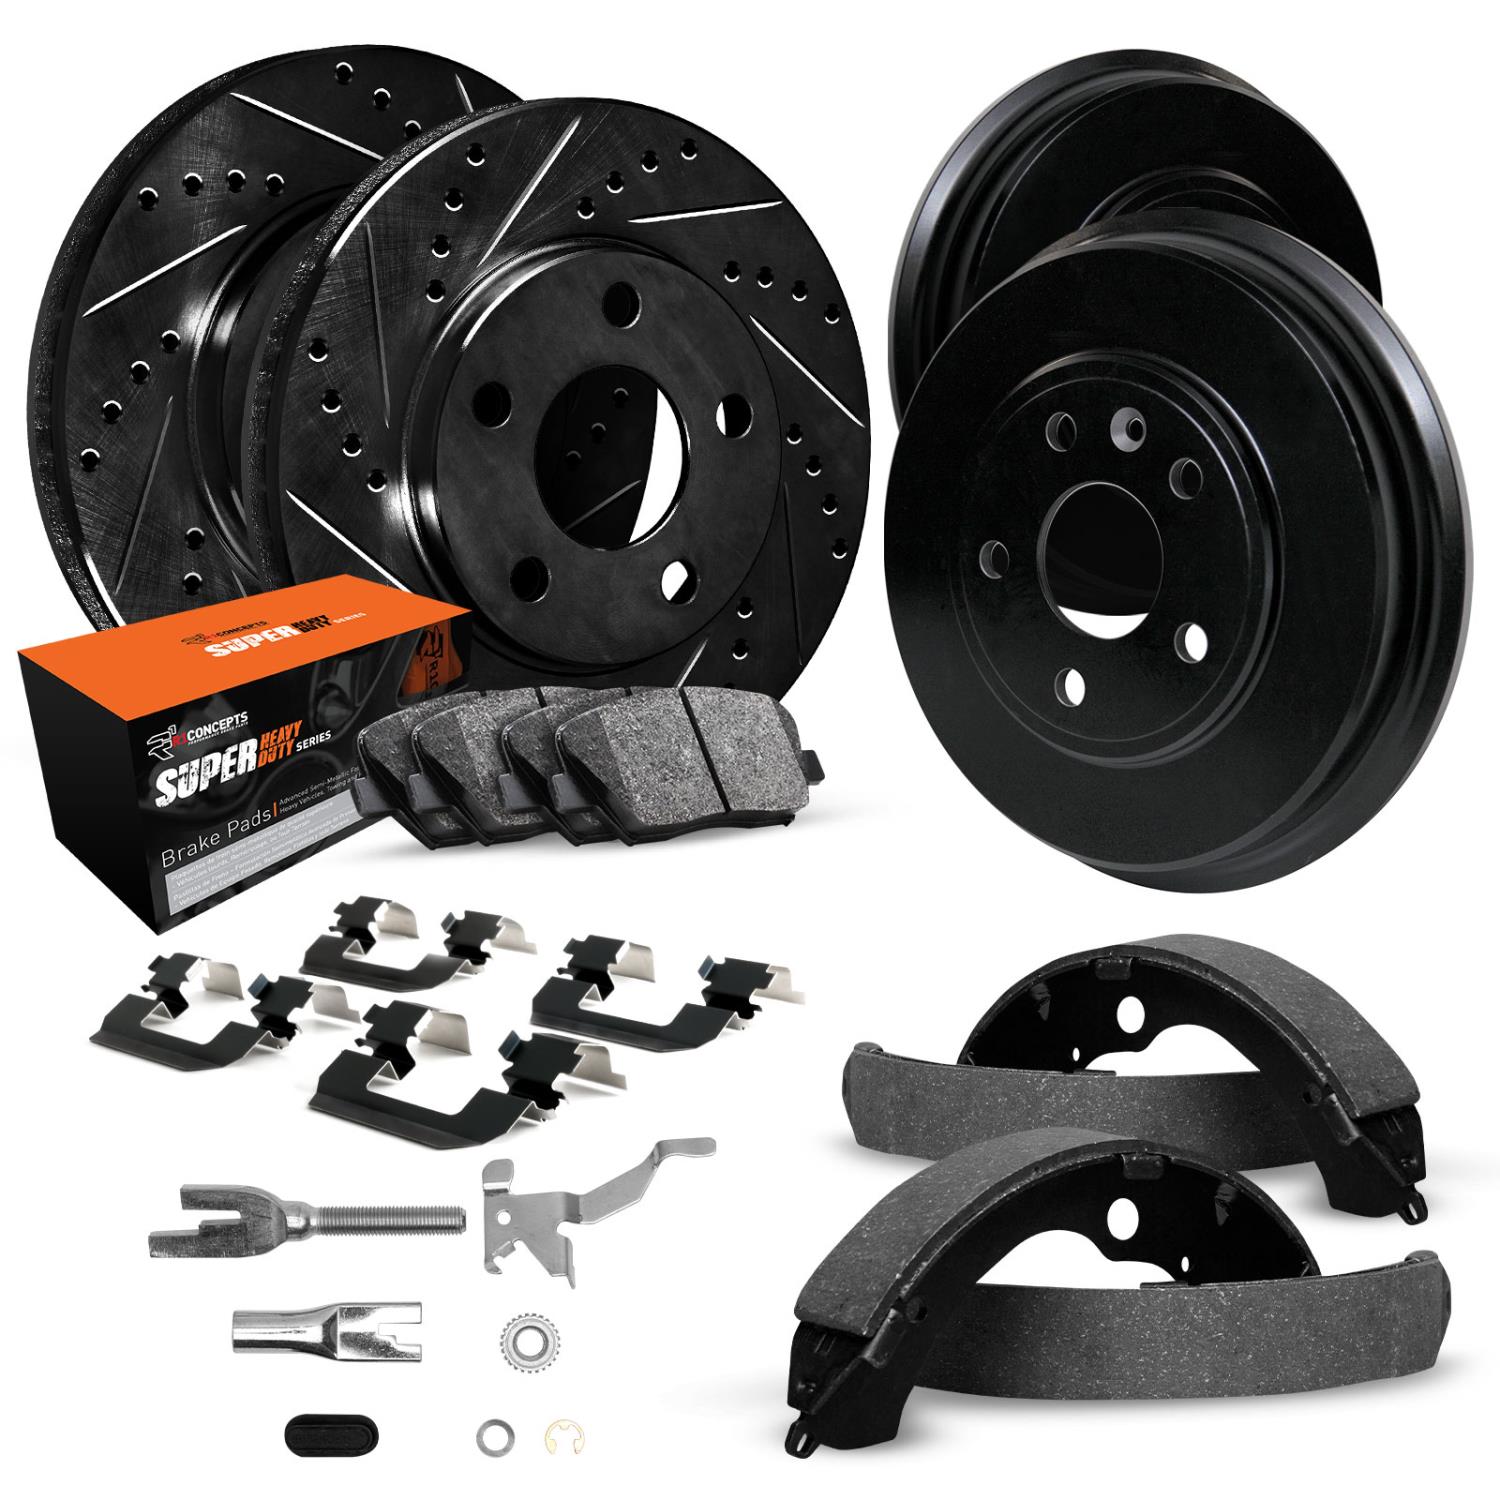 E-Line Drilled/Slotted Black Rotor & Drum Set w/Super-Duty Pads, Shoes, Hardware/Adjusters, 1998-2002 Ford/Lincoln/Mercury/Mazda